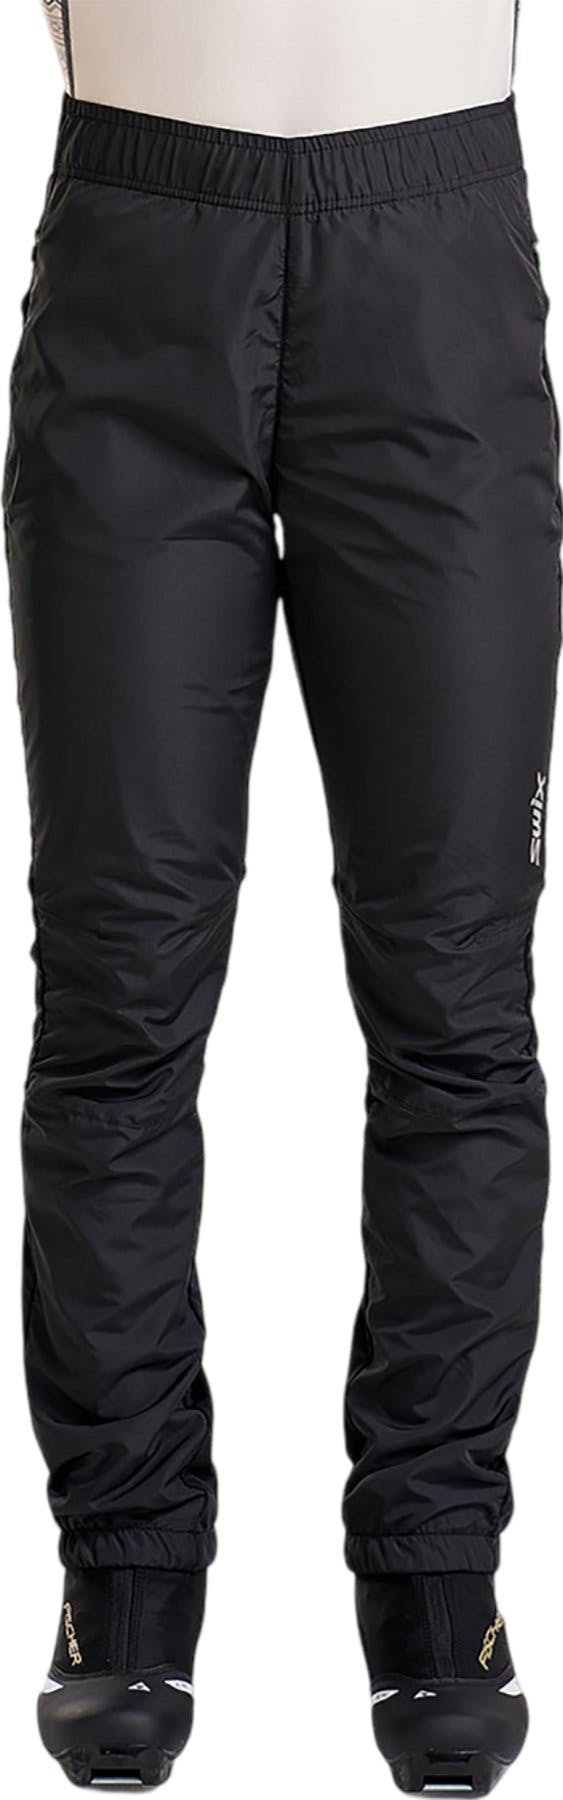 Product image for Vista Pull-On Pants - Women's